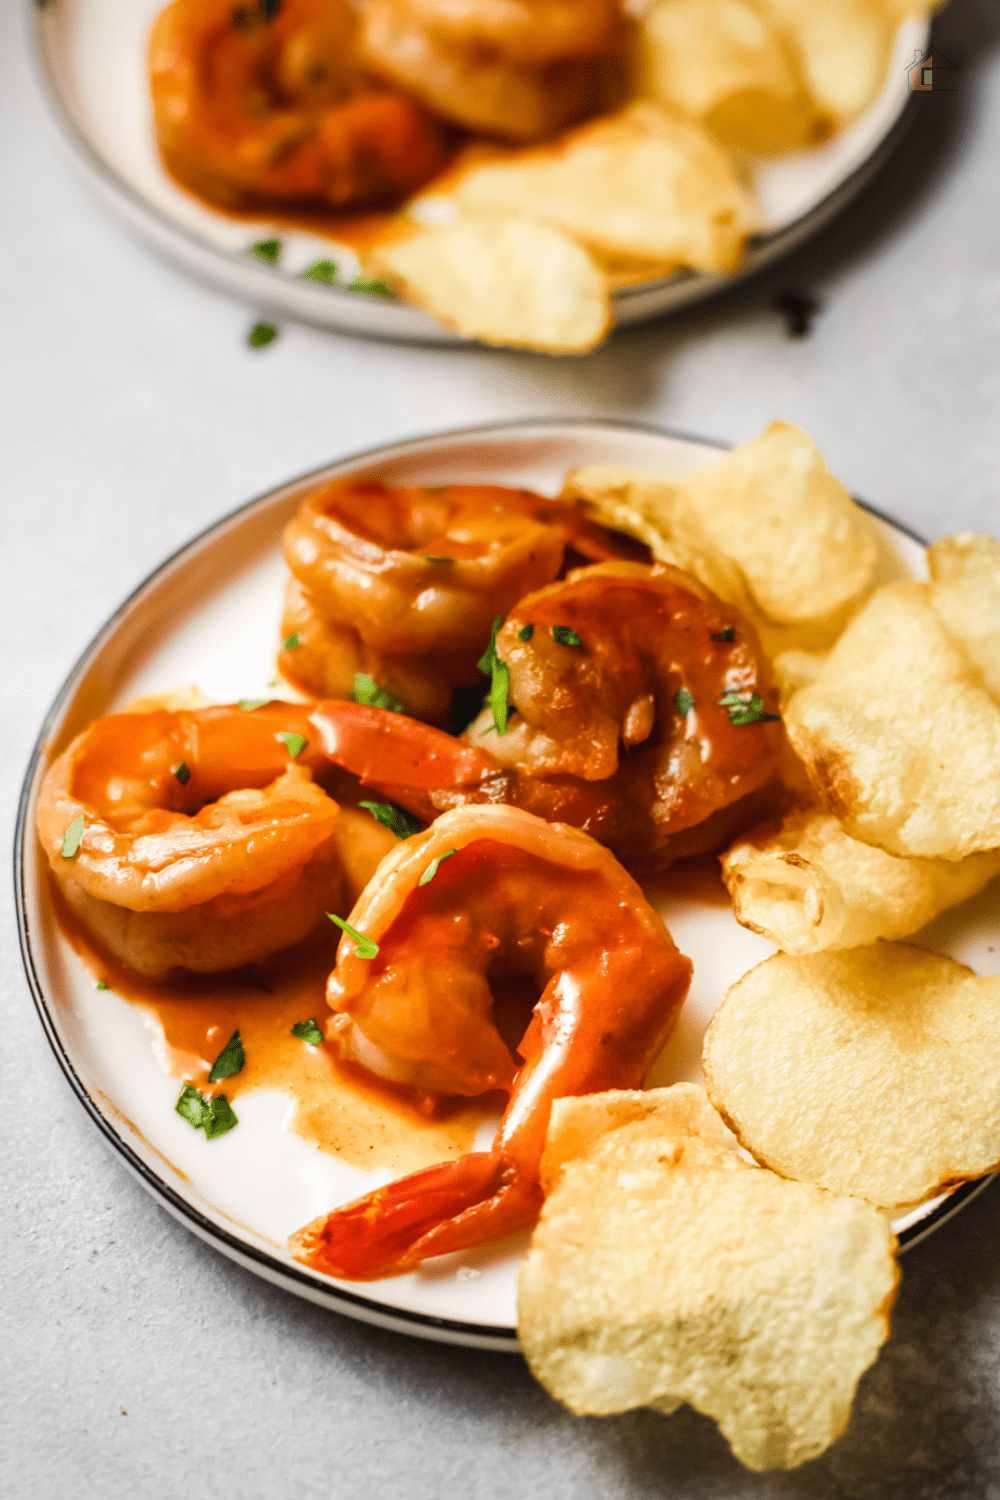 This Camarones al ajillo (garlic butter shrimp) recipe so easy and delicious we served our tapas-style. Still, you can serve it over tostones, mofongo, and rice. via @mystayathome